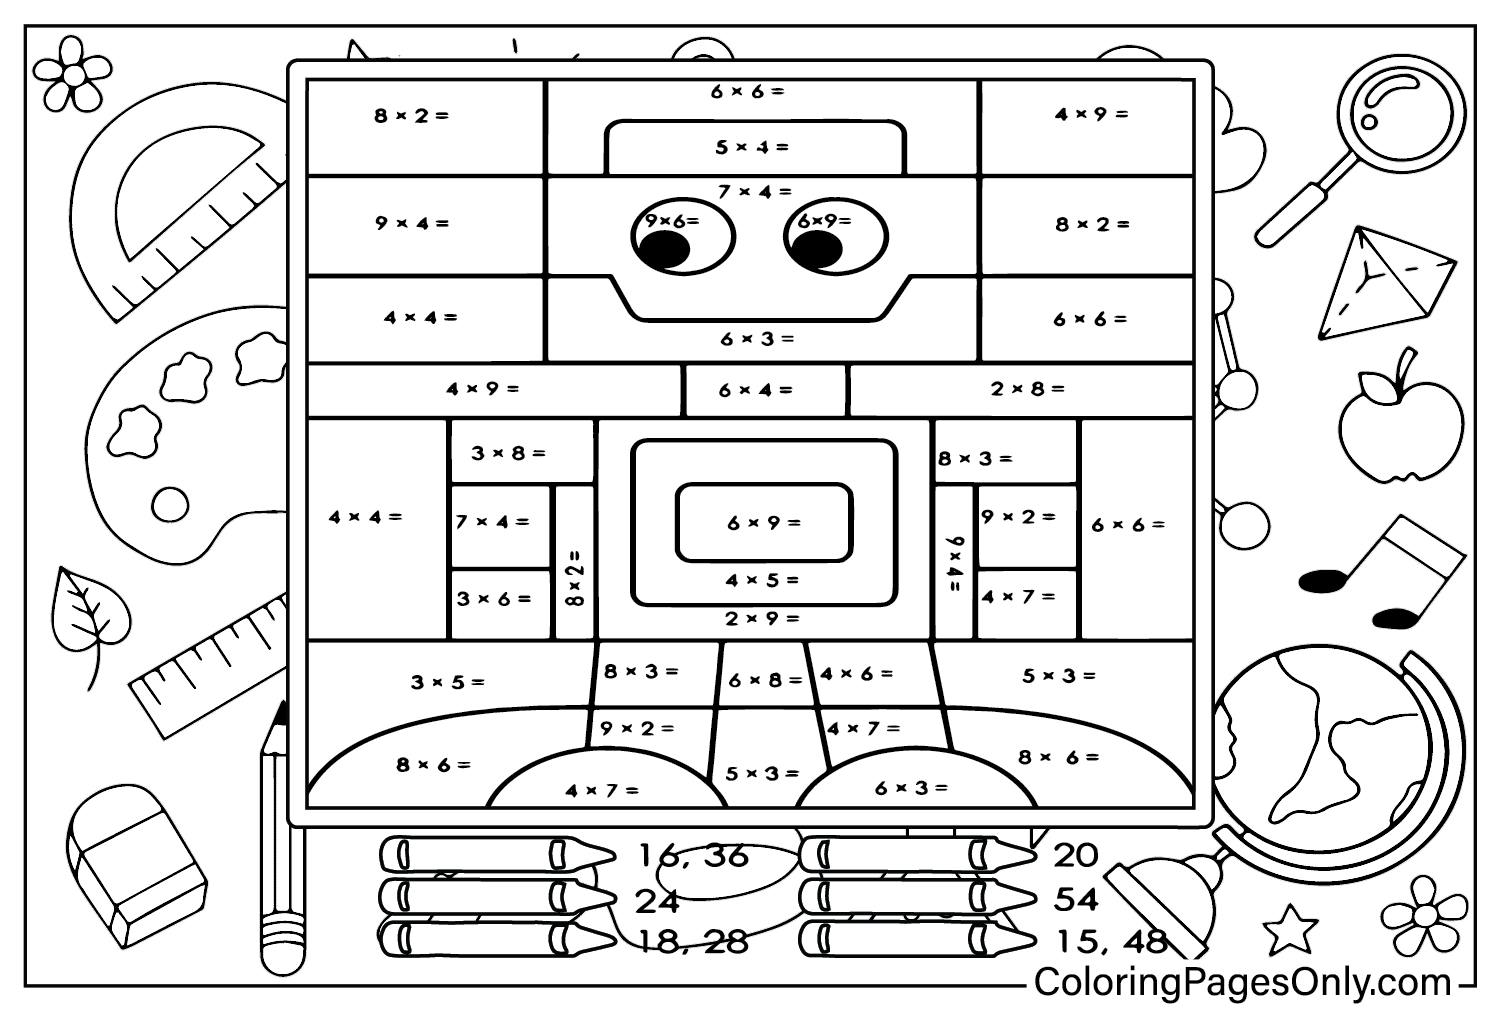 Multiplication Chart Coloring Sheet for Kids Free Printable Coloring